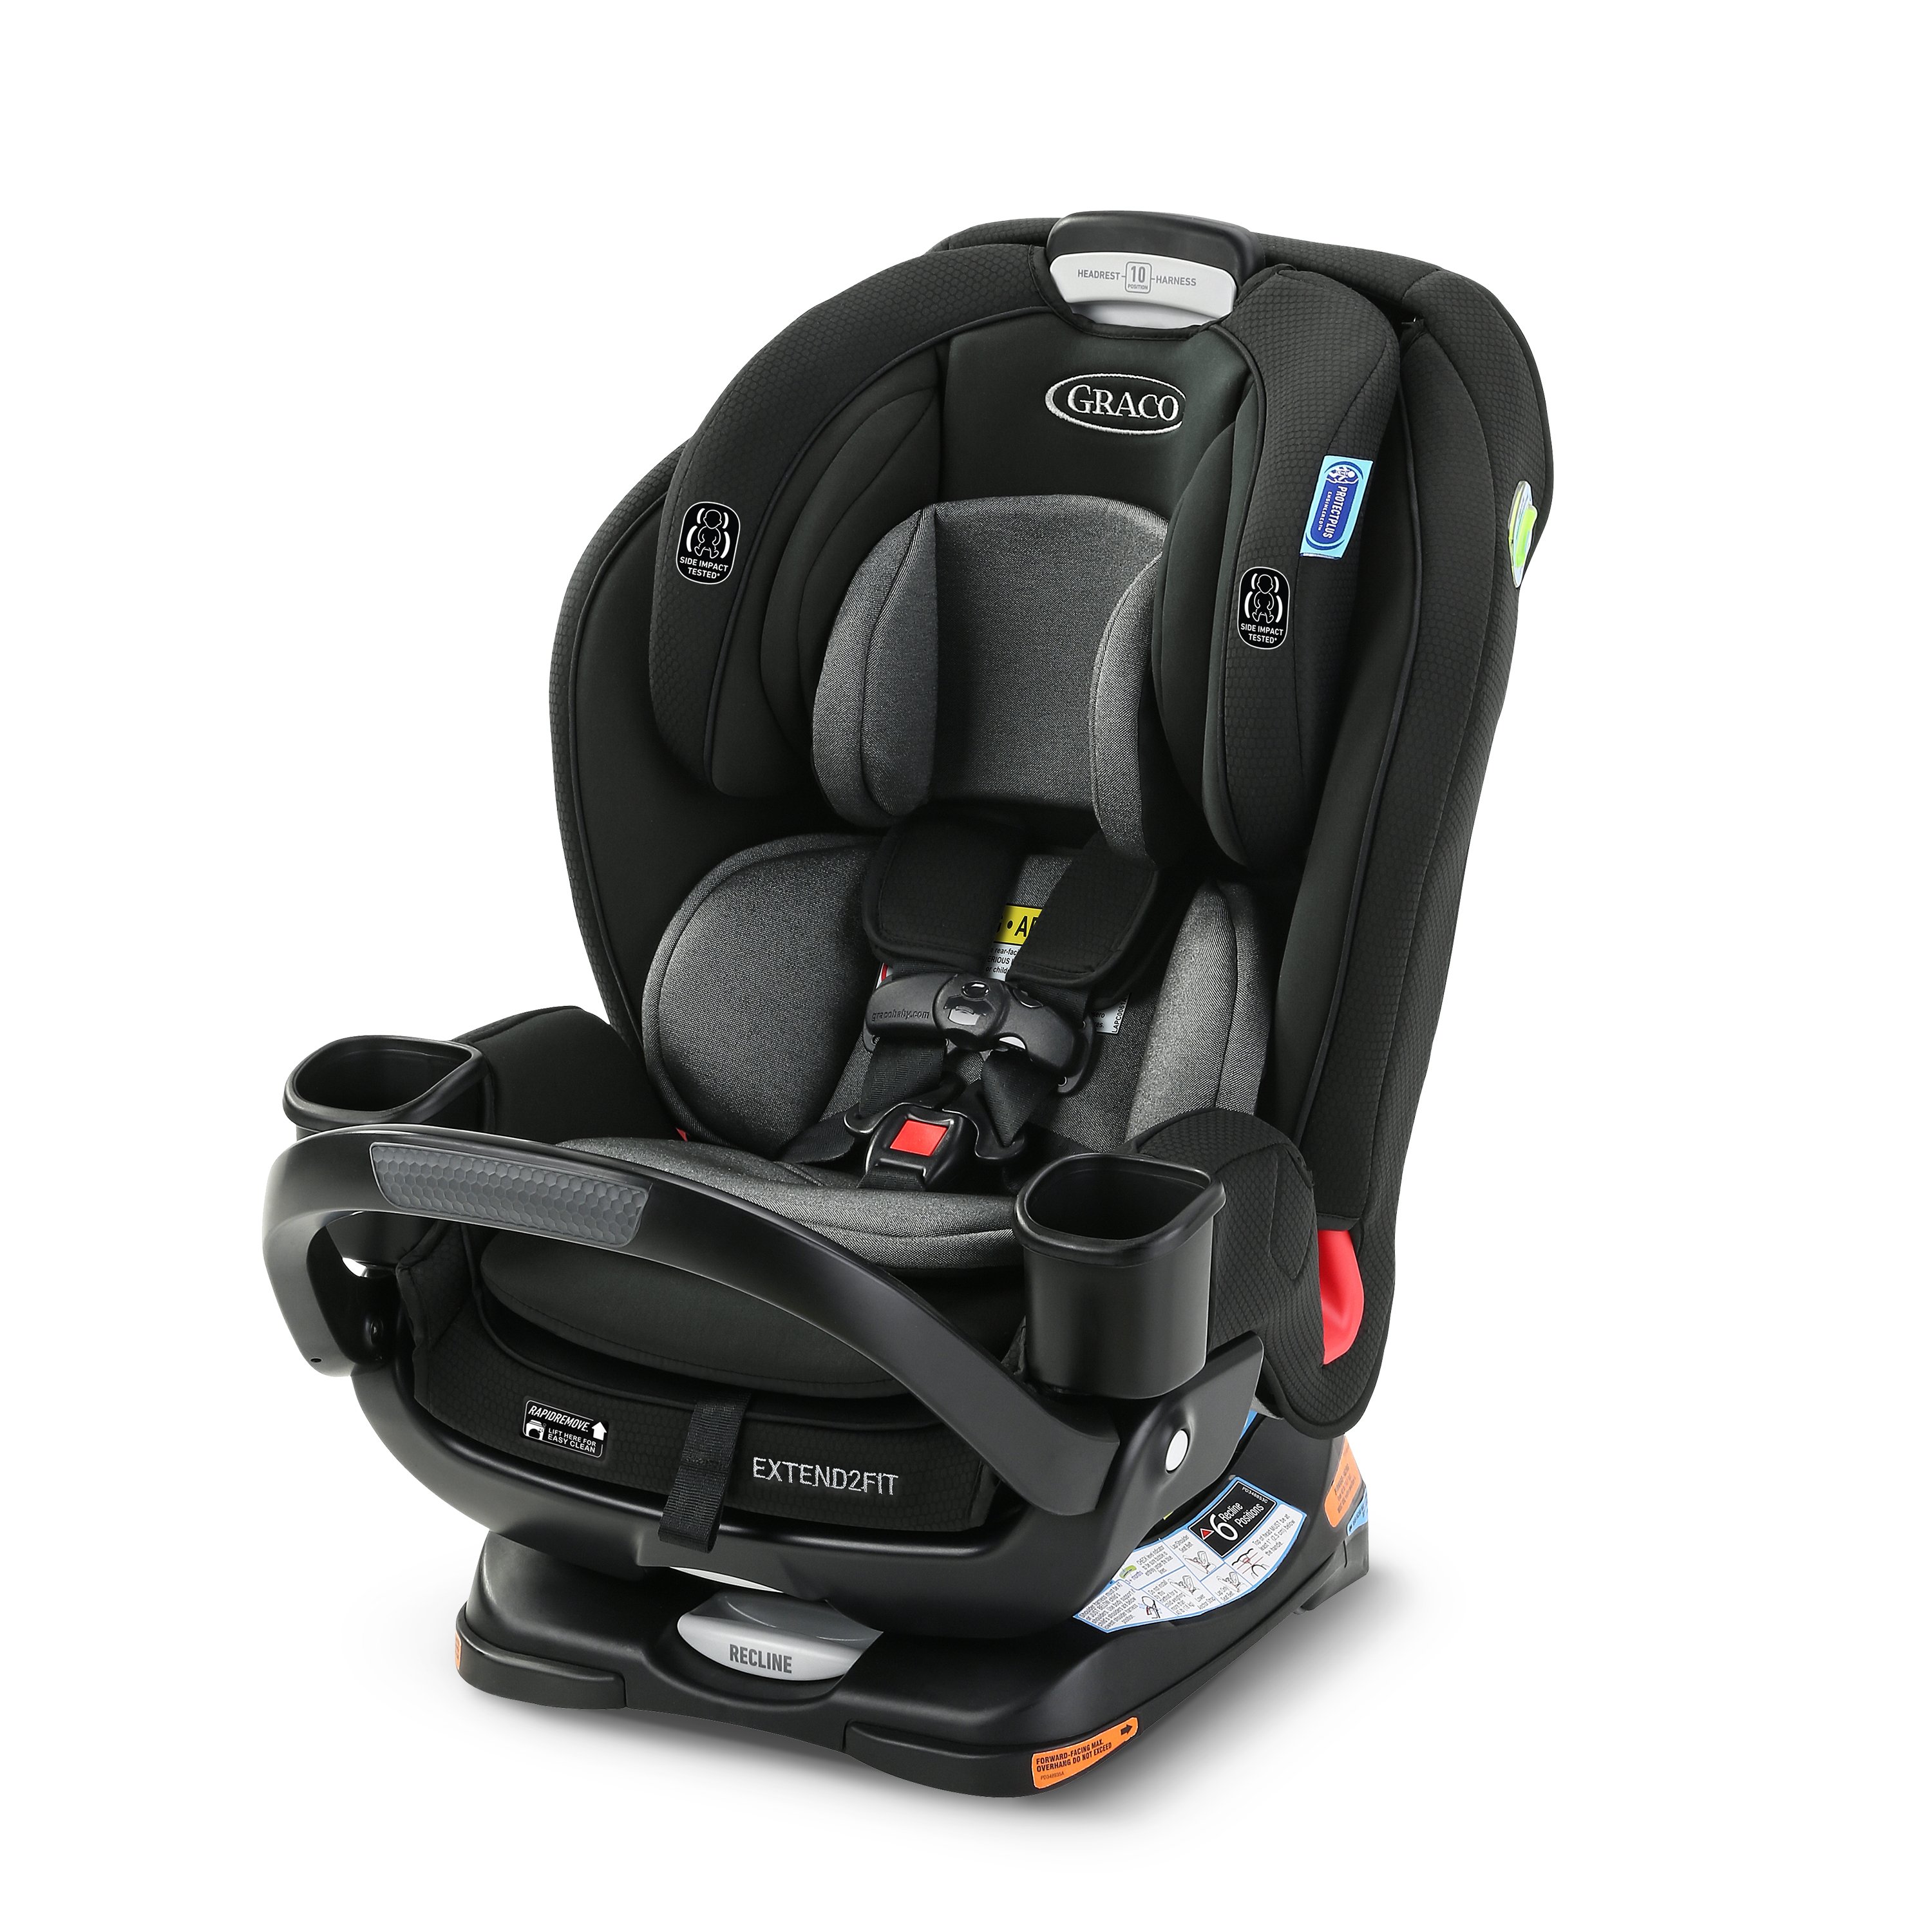 Extend2Fit® 3-in-1 Car Seat featuring Anti-Rebound Bar | Graco Baby